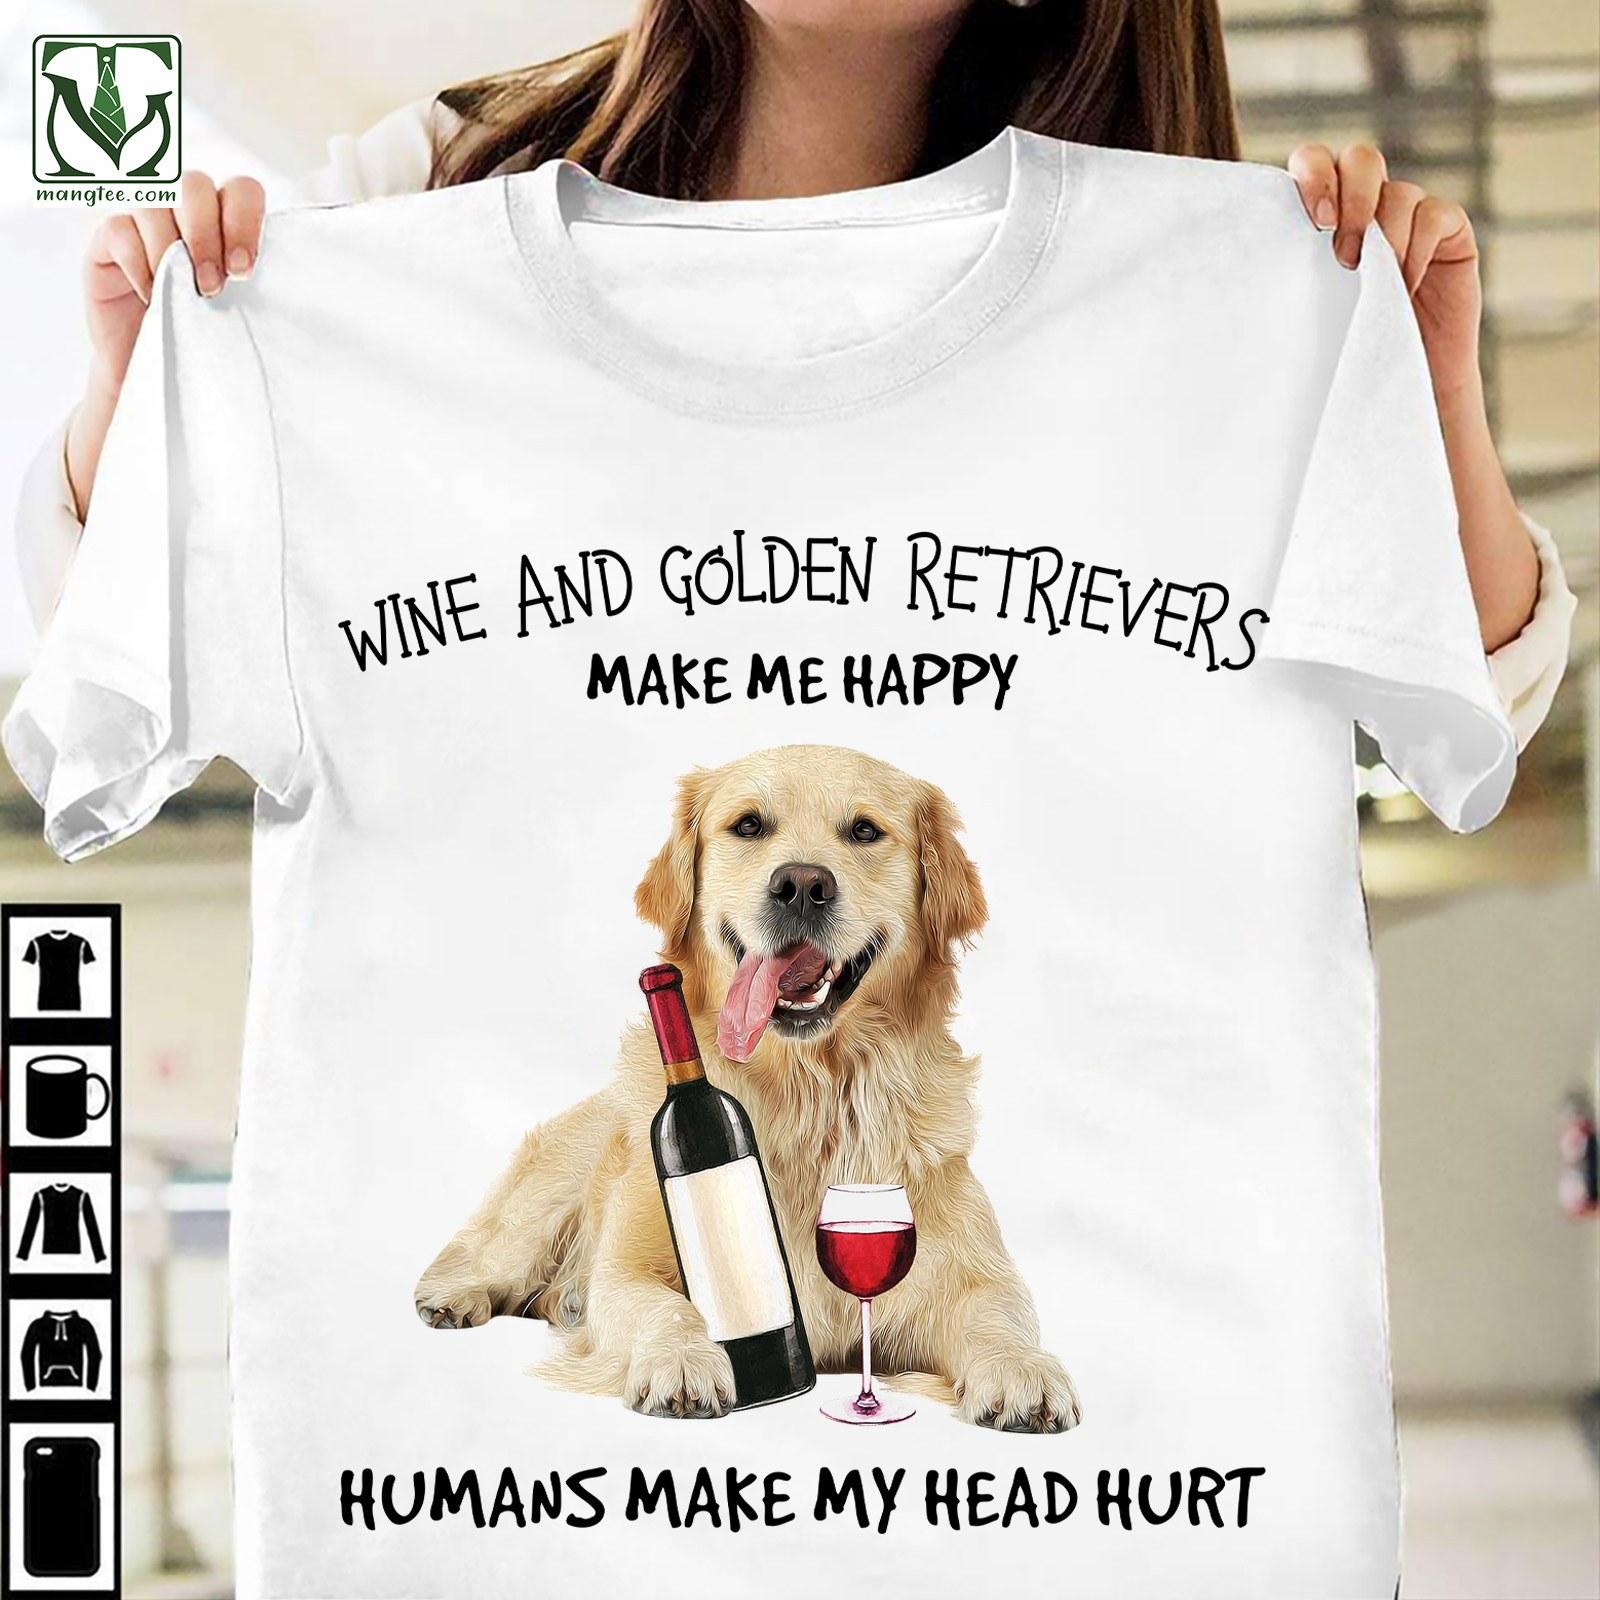 Wine and Golden retrievers make me happy, humans make my head hurt - Wine and dog, gift for dog lover